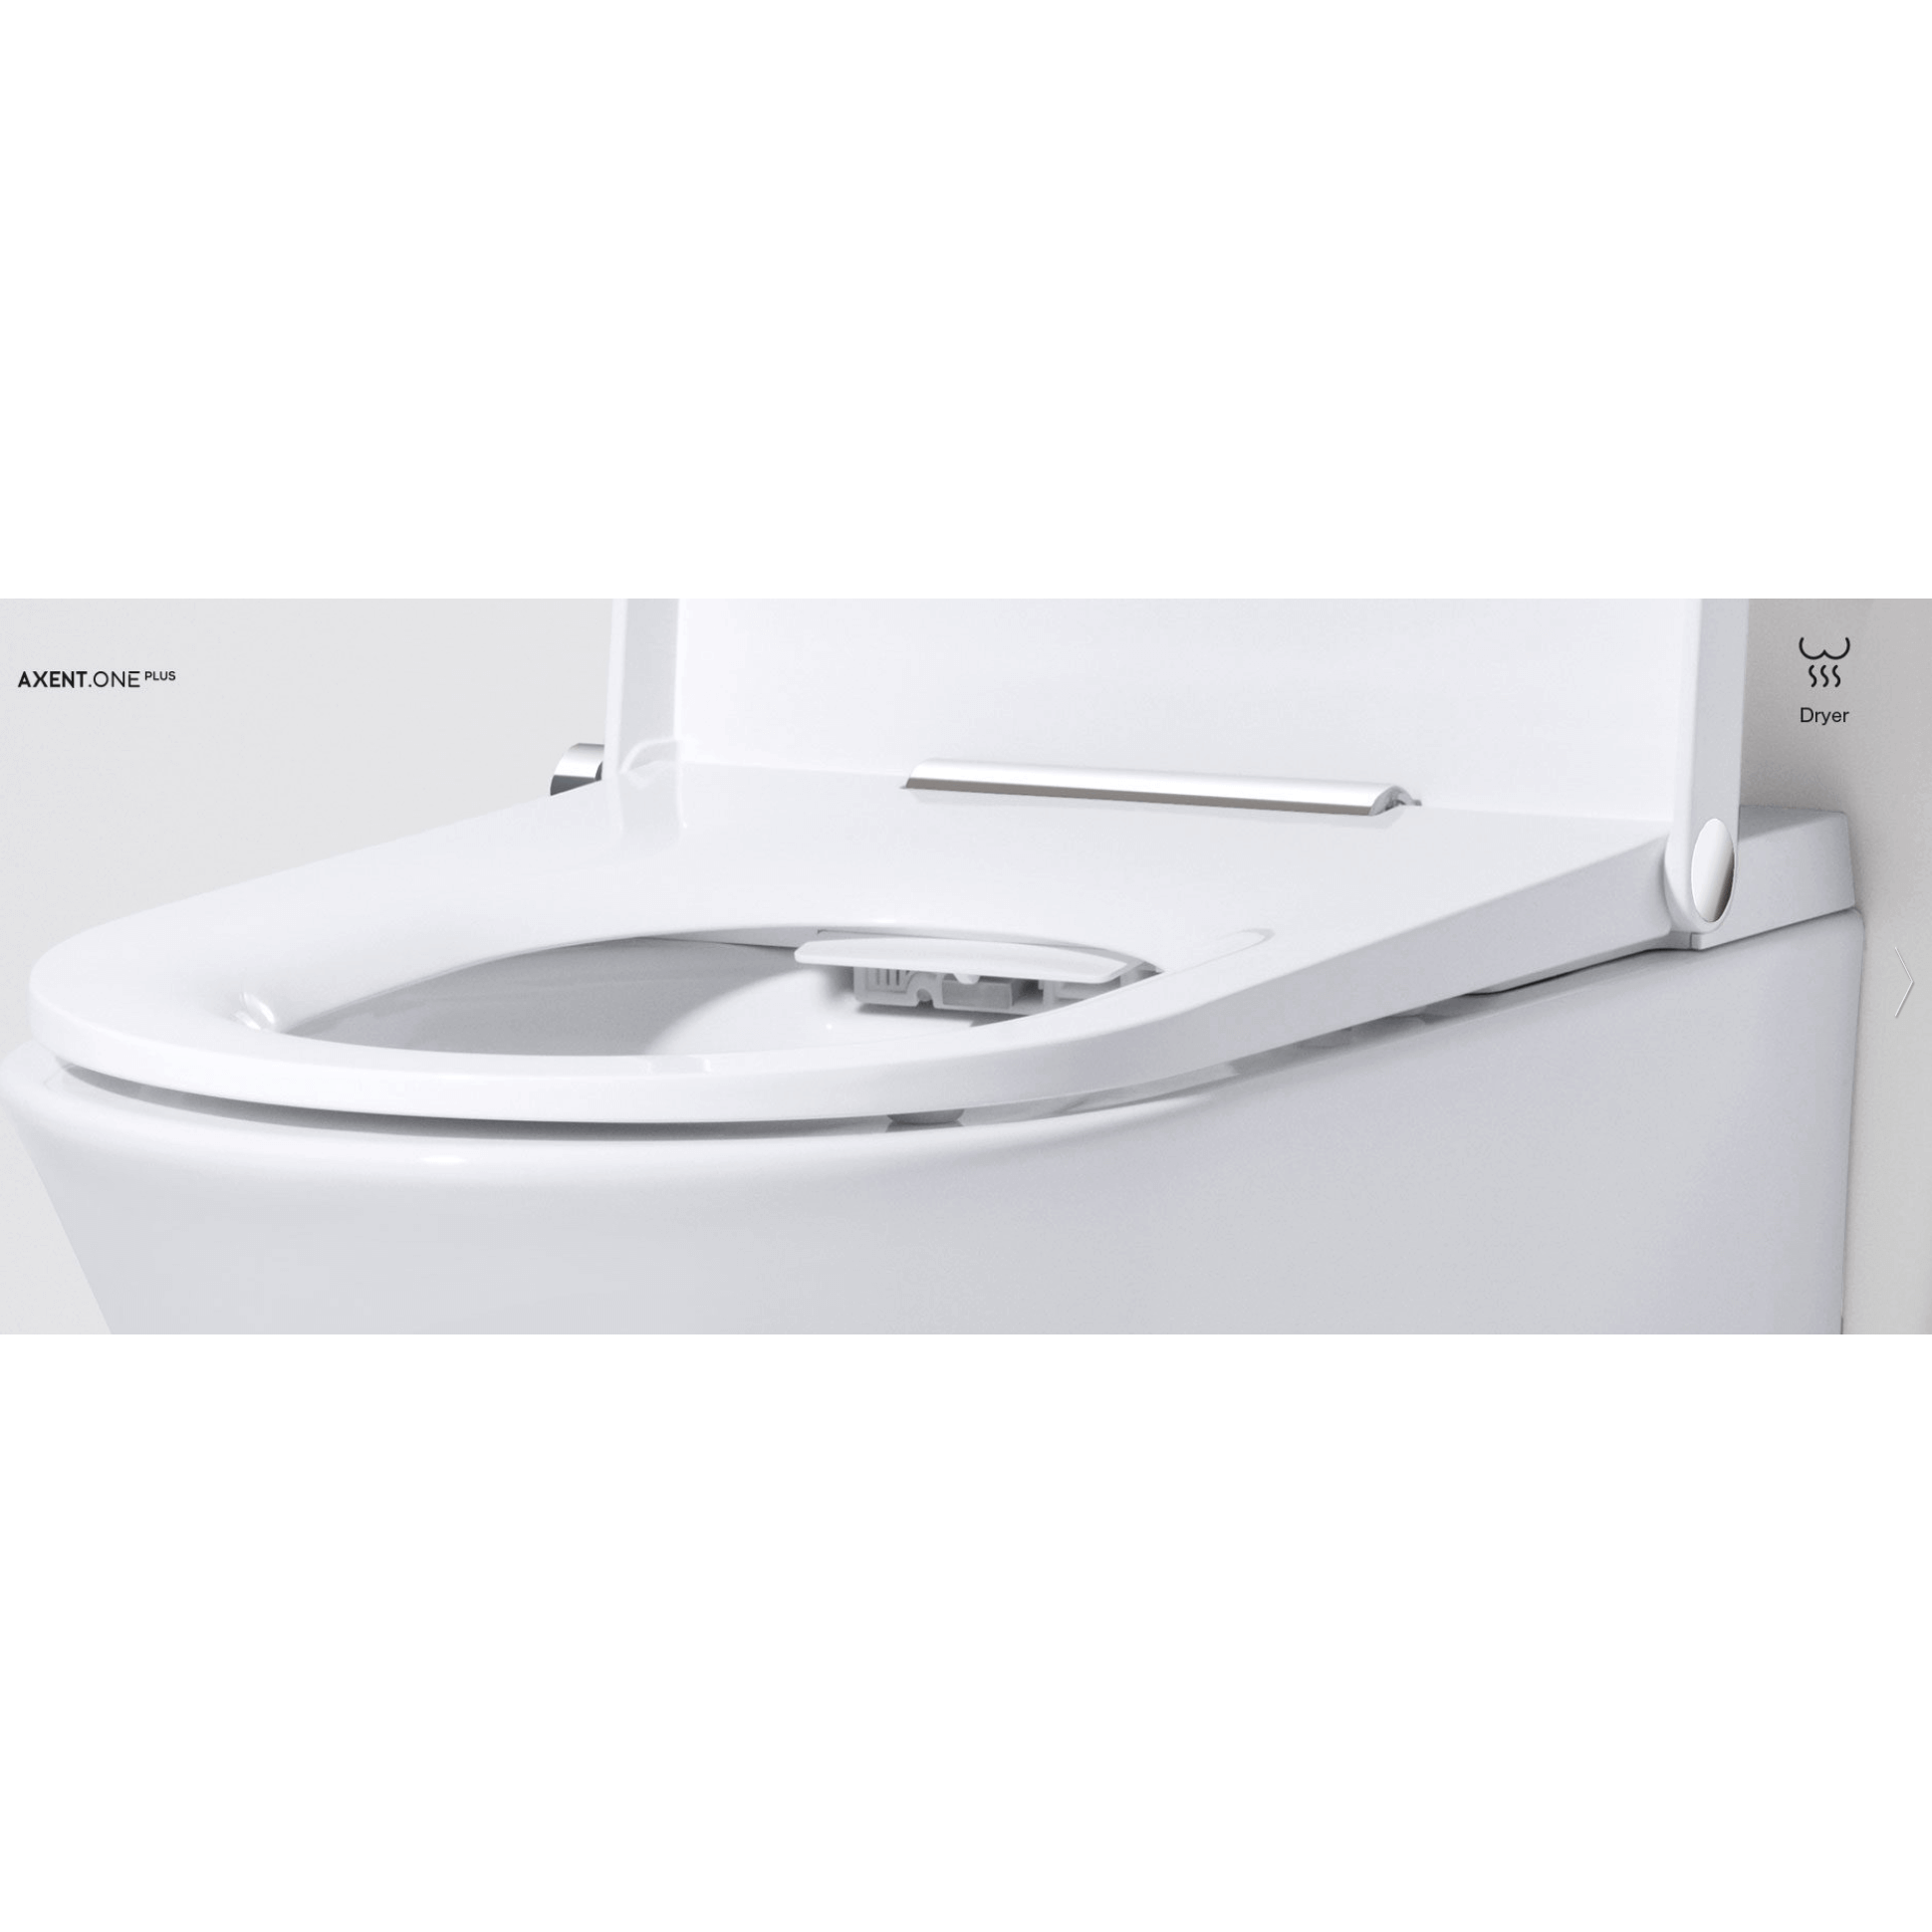 AXENT One Plus Wall Hung Intelligent Toilet - angled view of seat